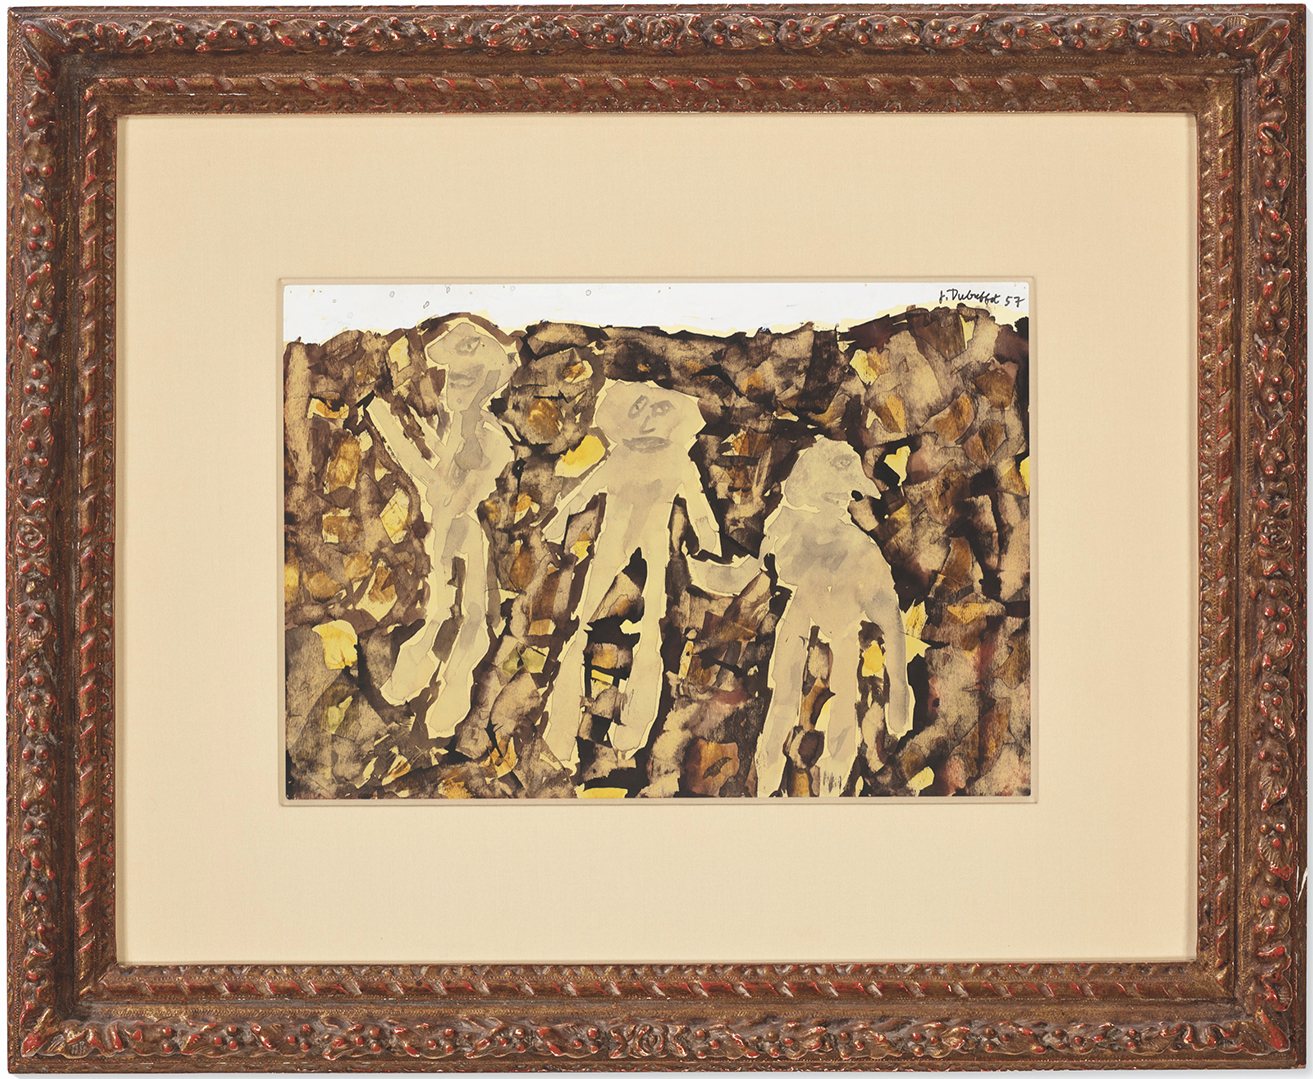 Jean Dubuffet Drawing of two flying automobiles in gold frame